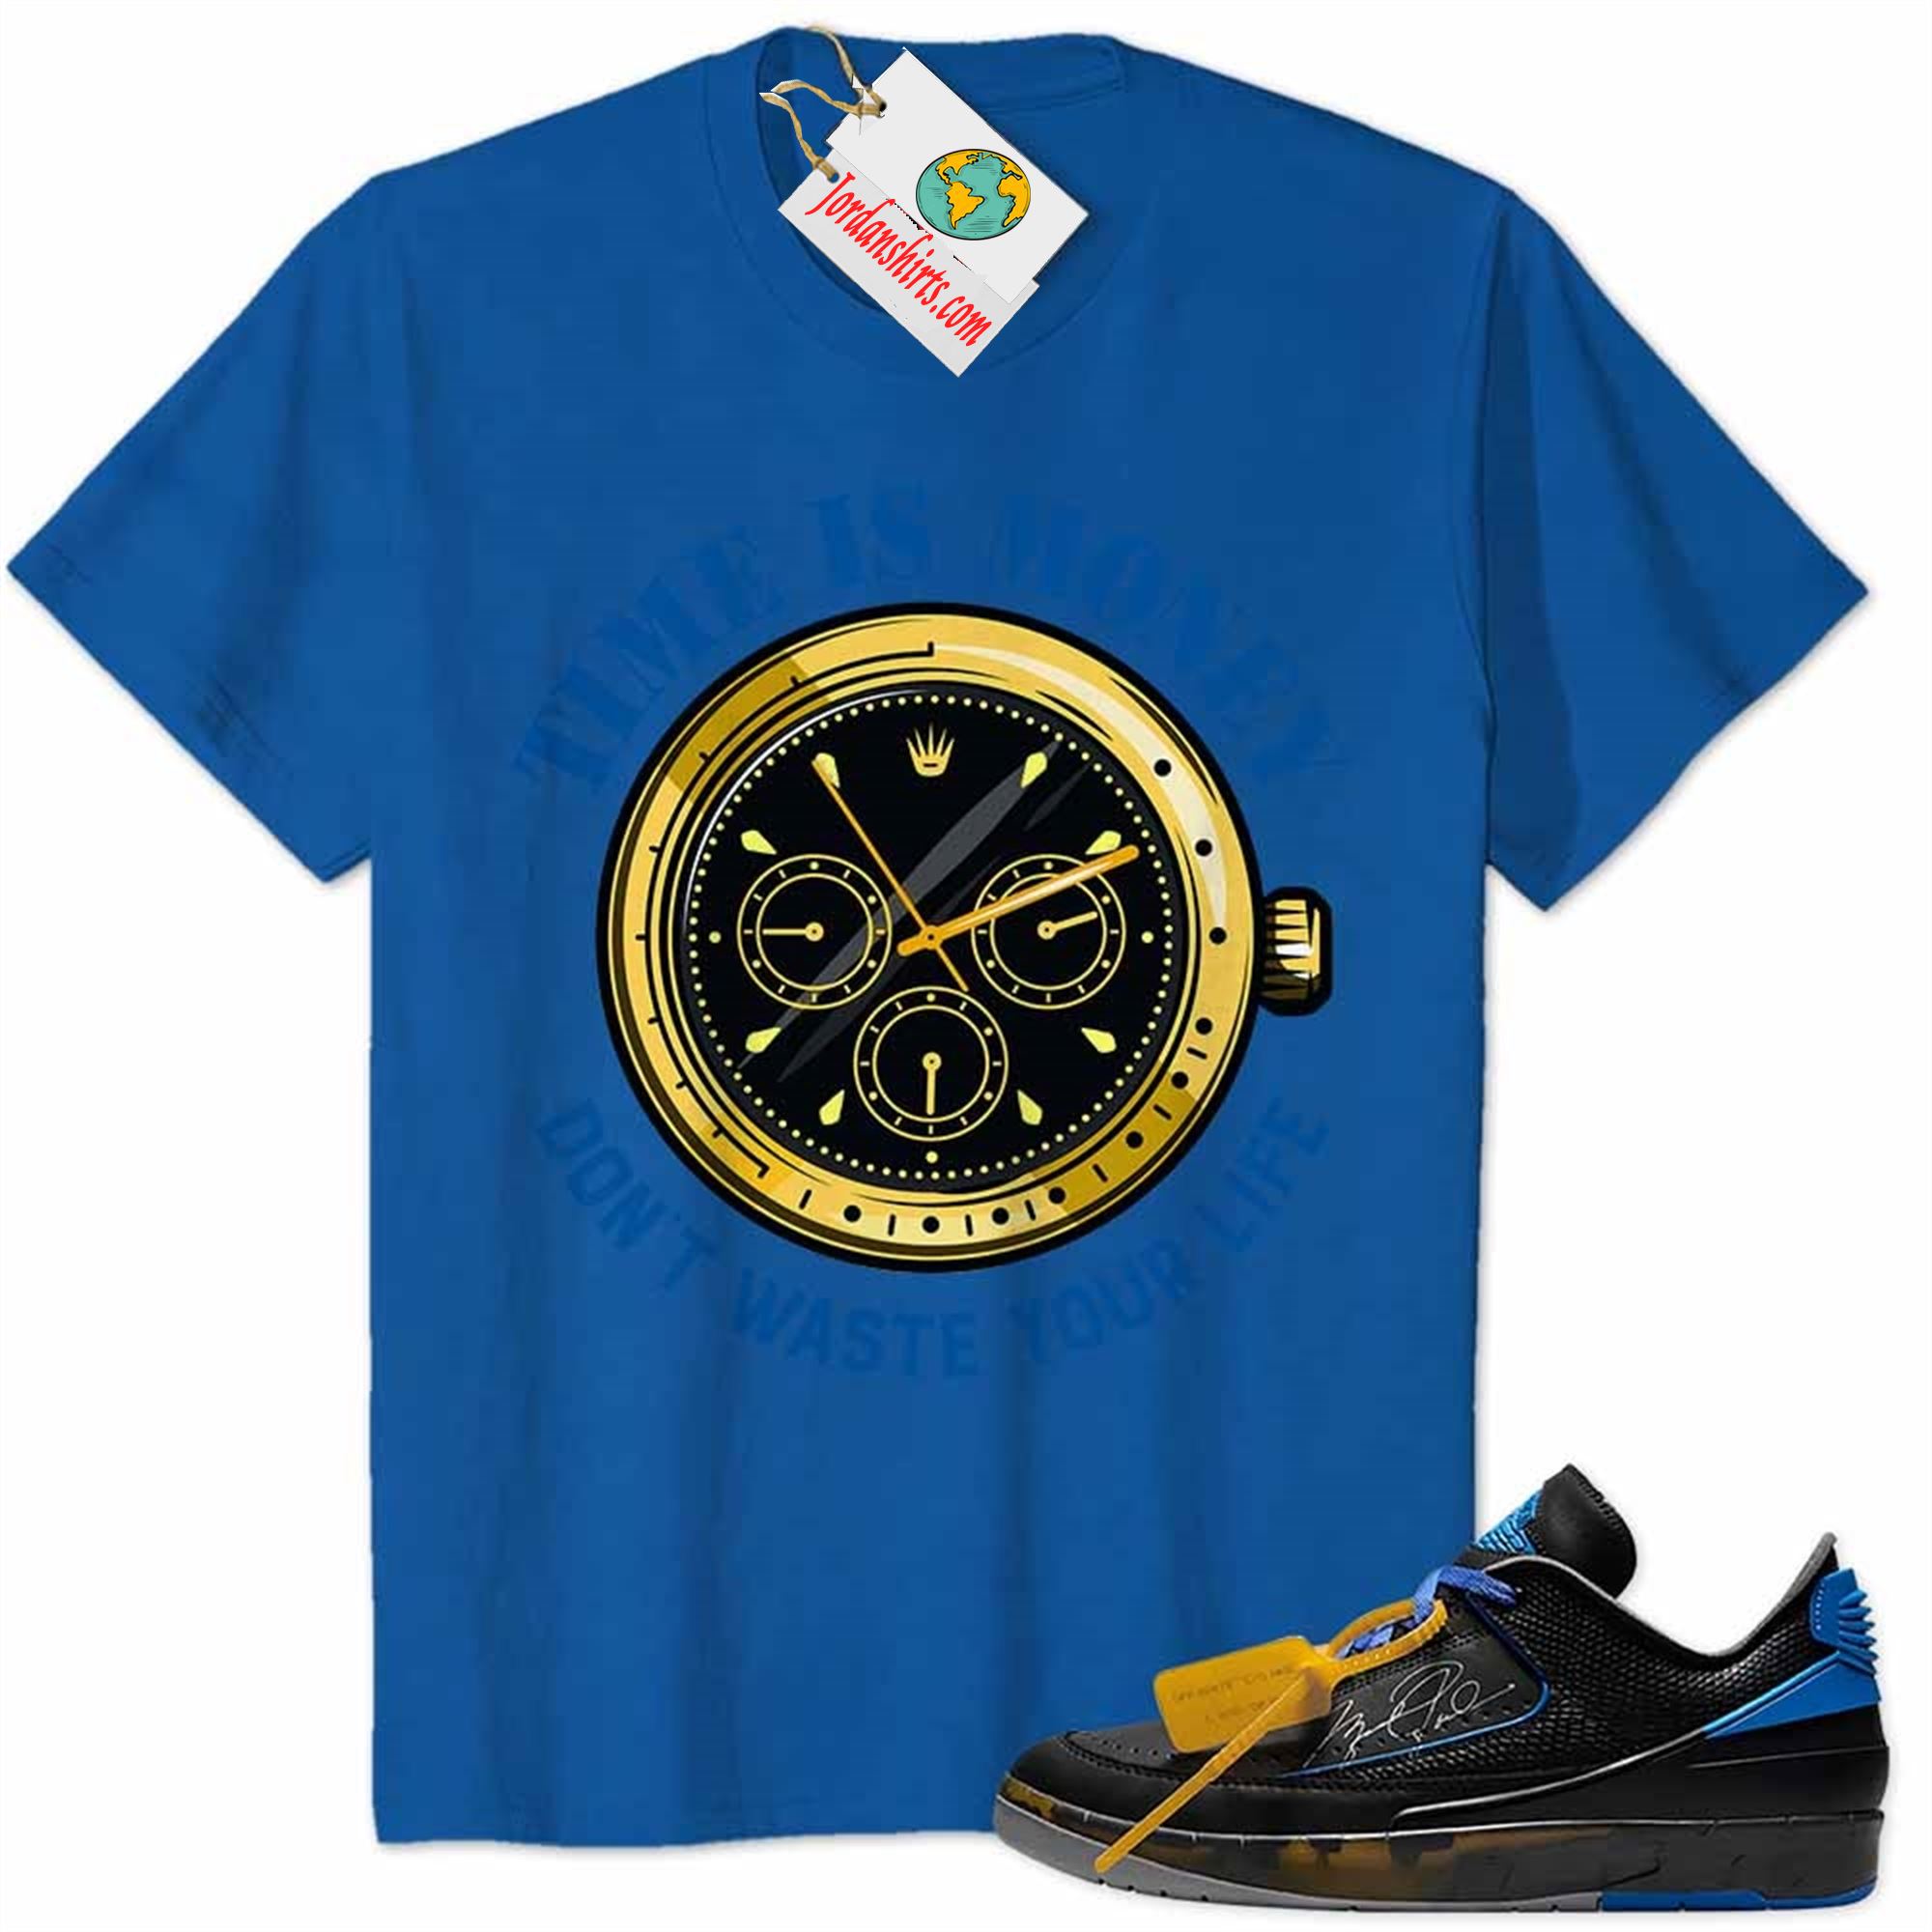 Jordan 2 Shirt, Time Is Money Dont Waste Your Life Blue Air Jordan 2 Low X Off-white Black And Varsity Royal 2s Plus Size Up To 5xl